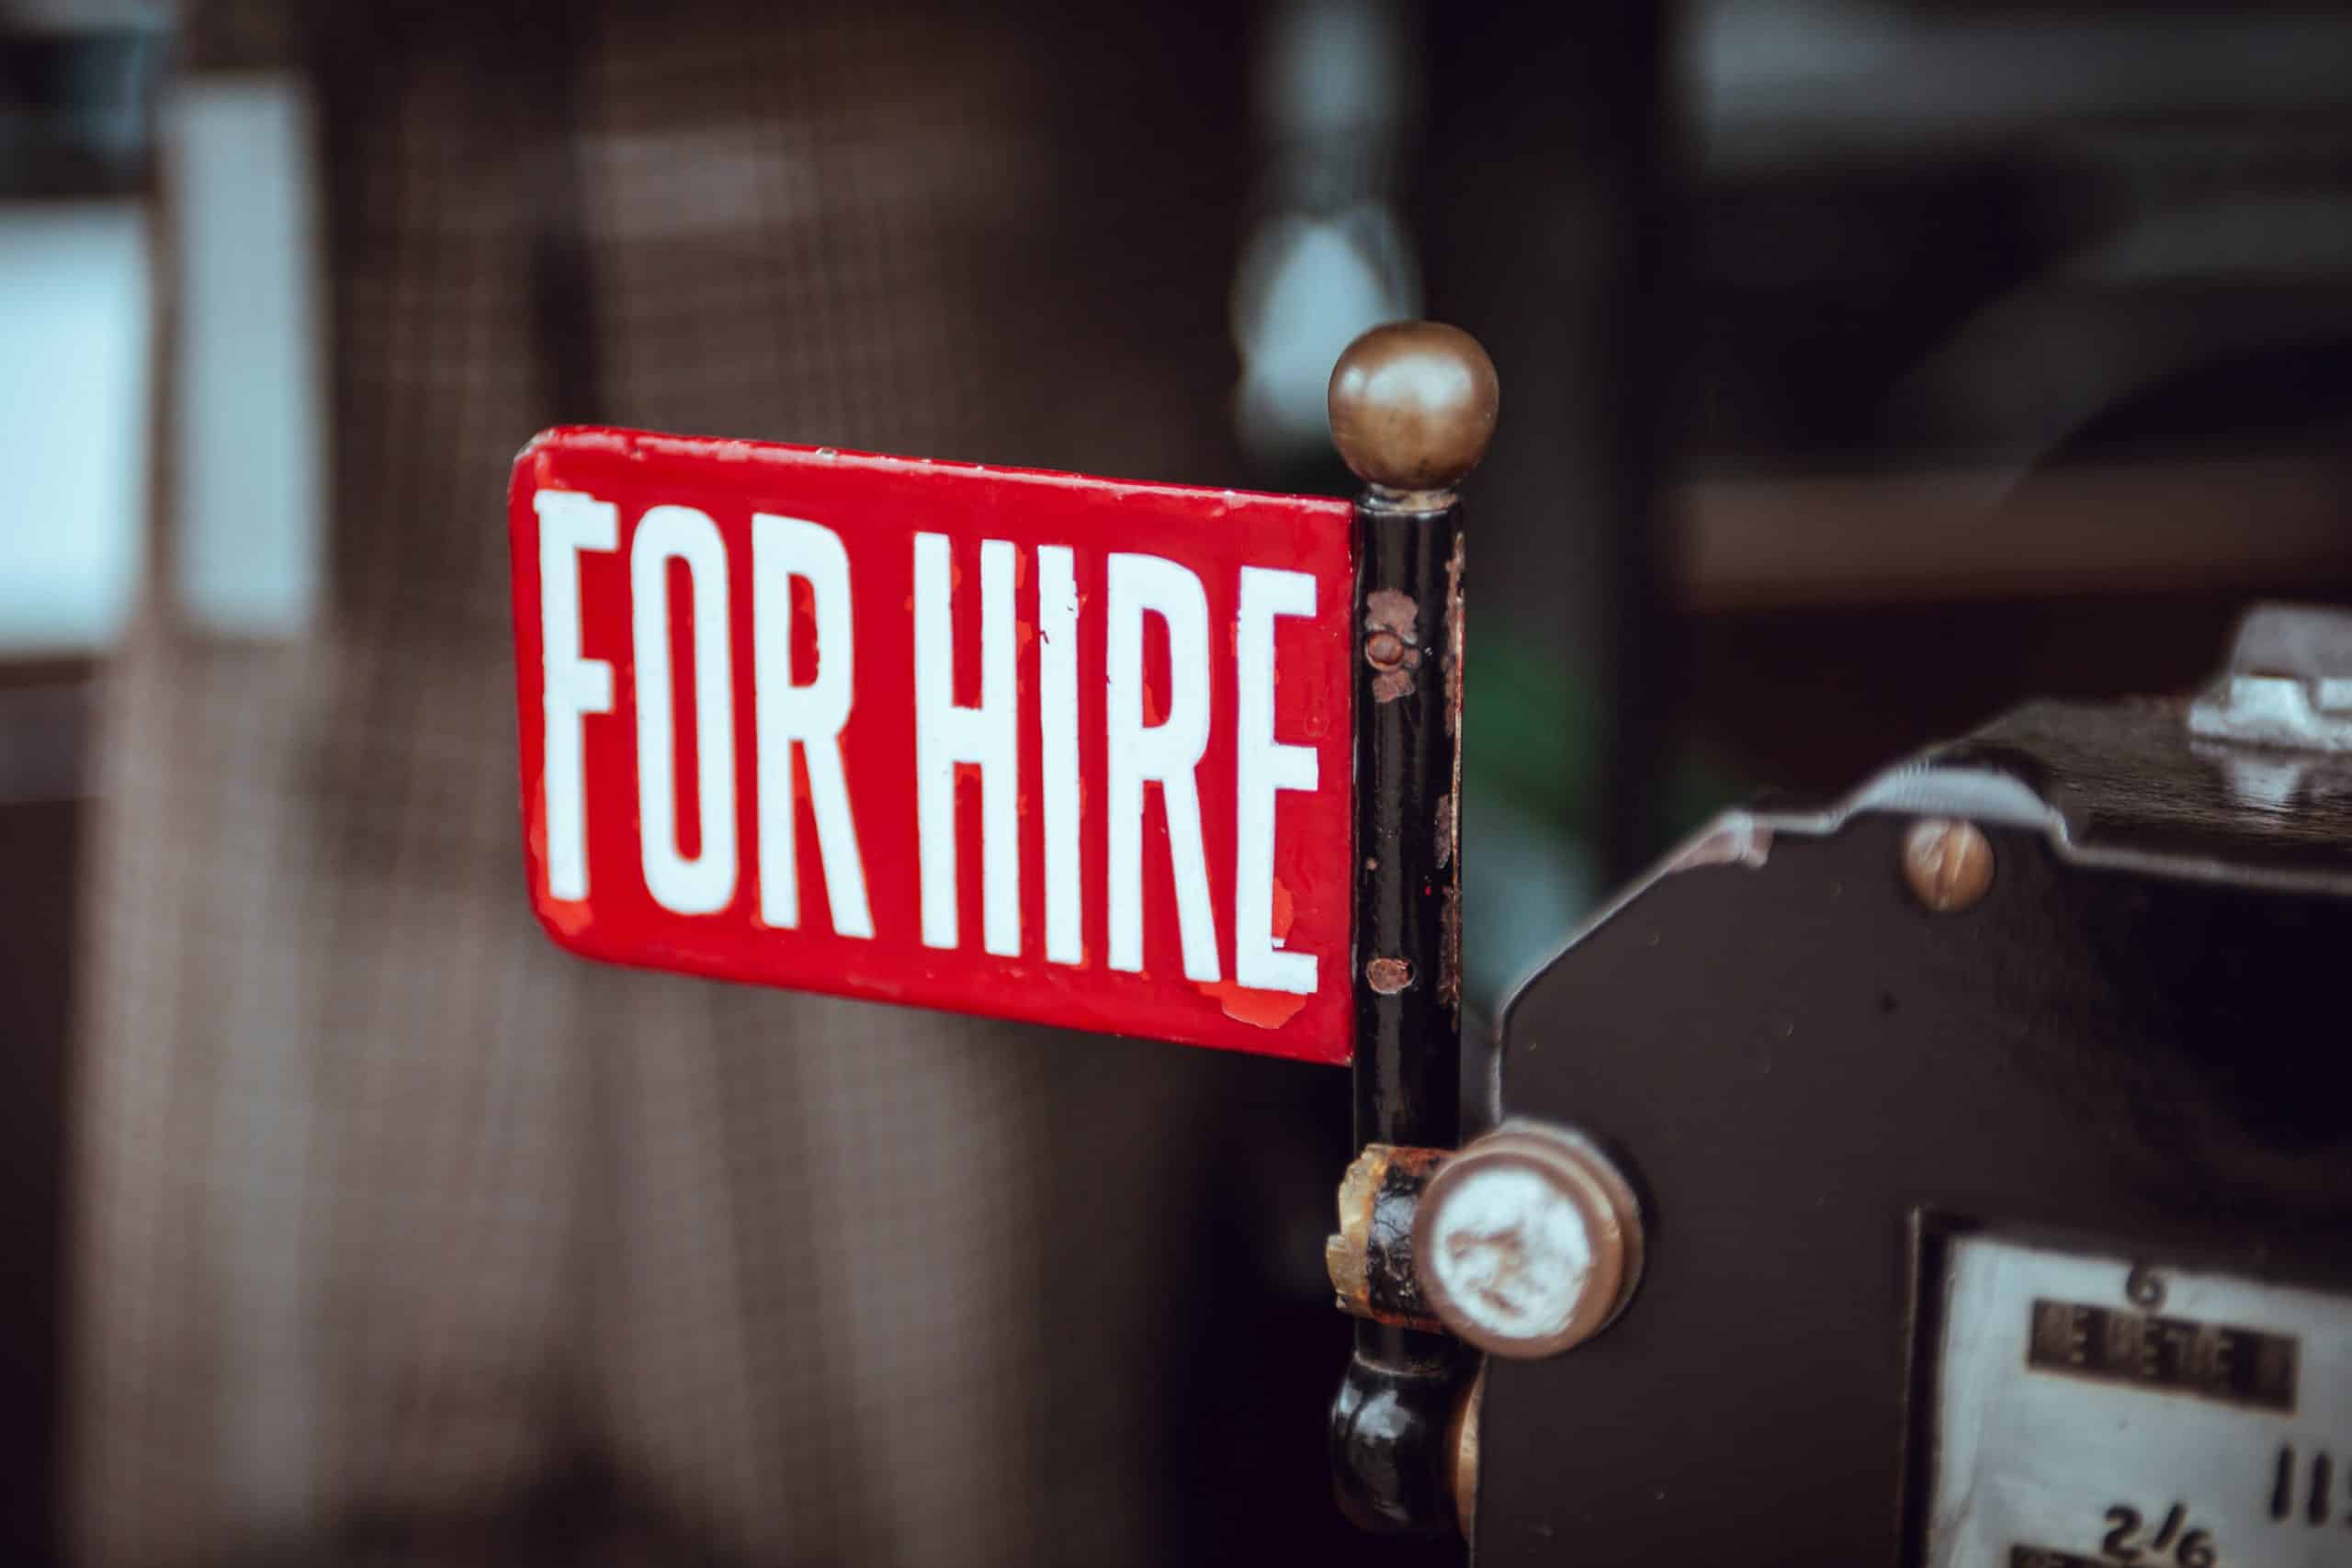 Image of a small, red "For Hire" sign